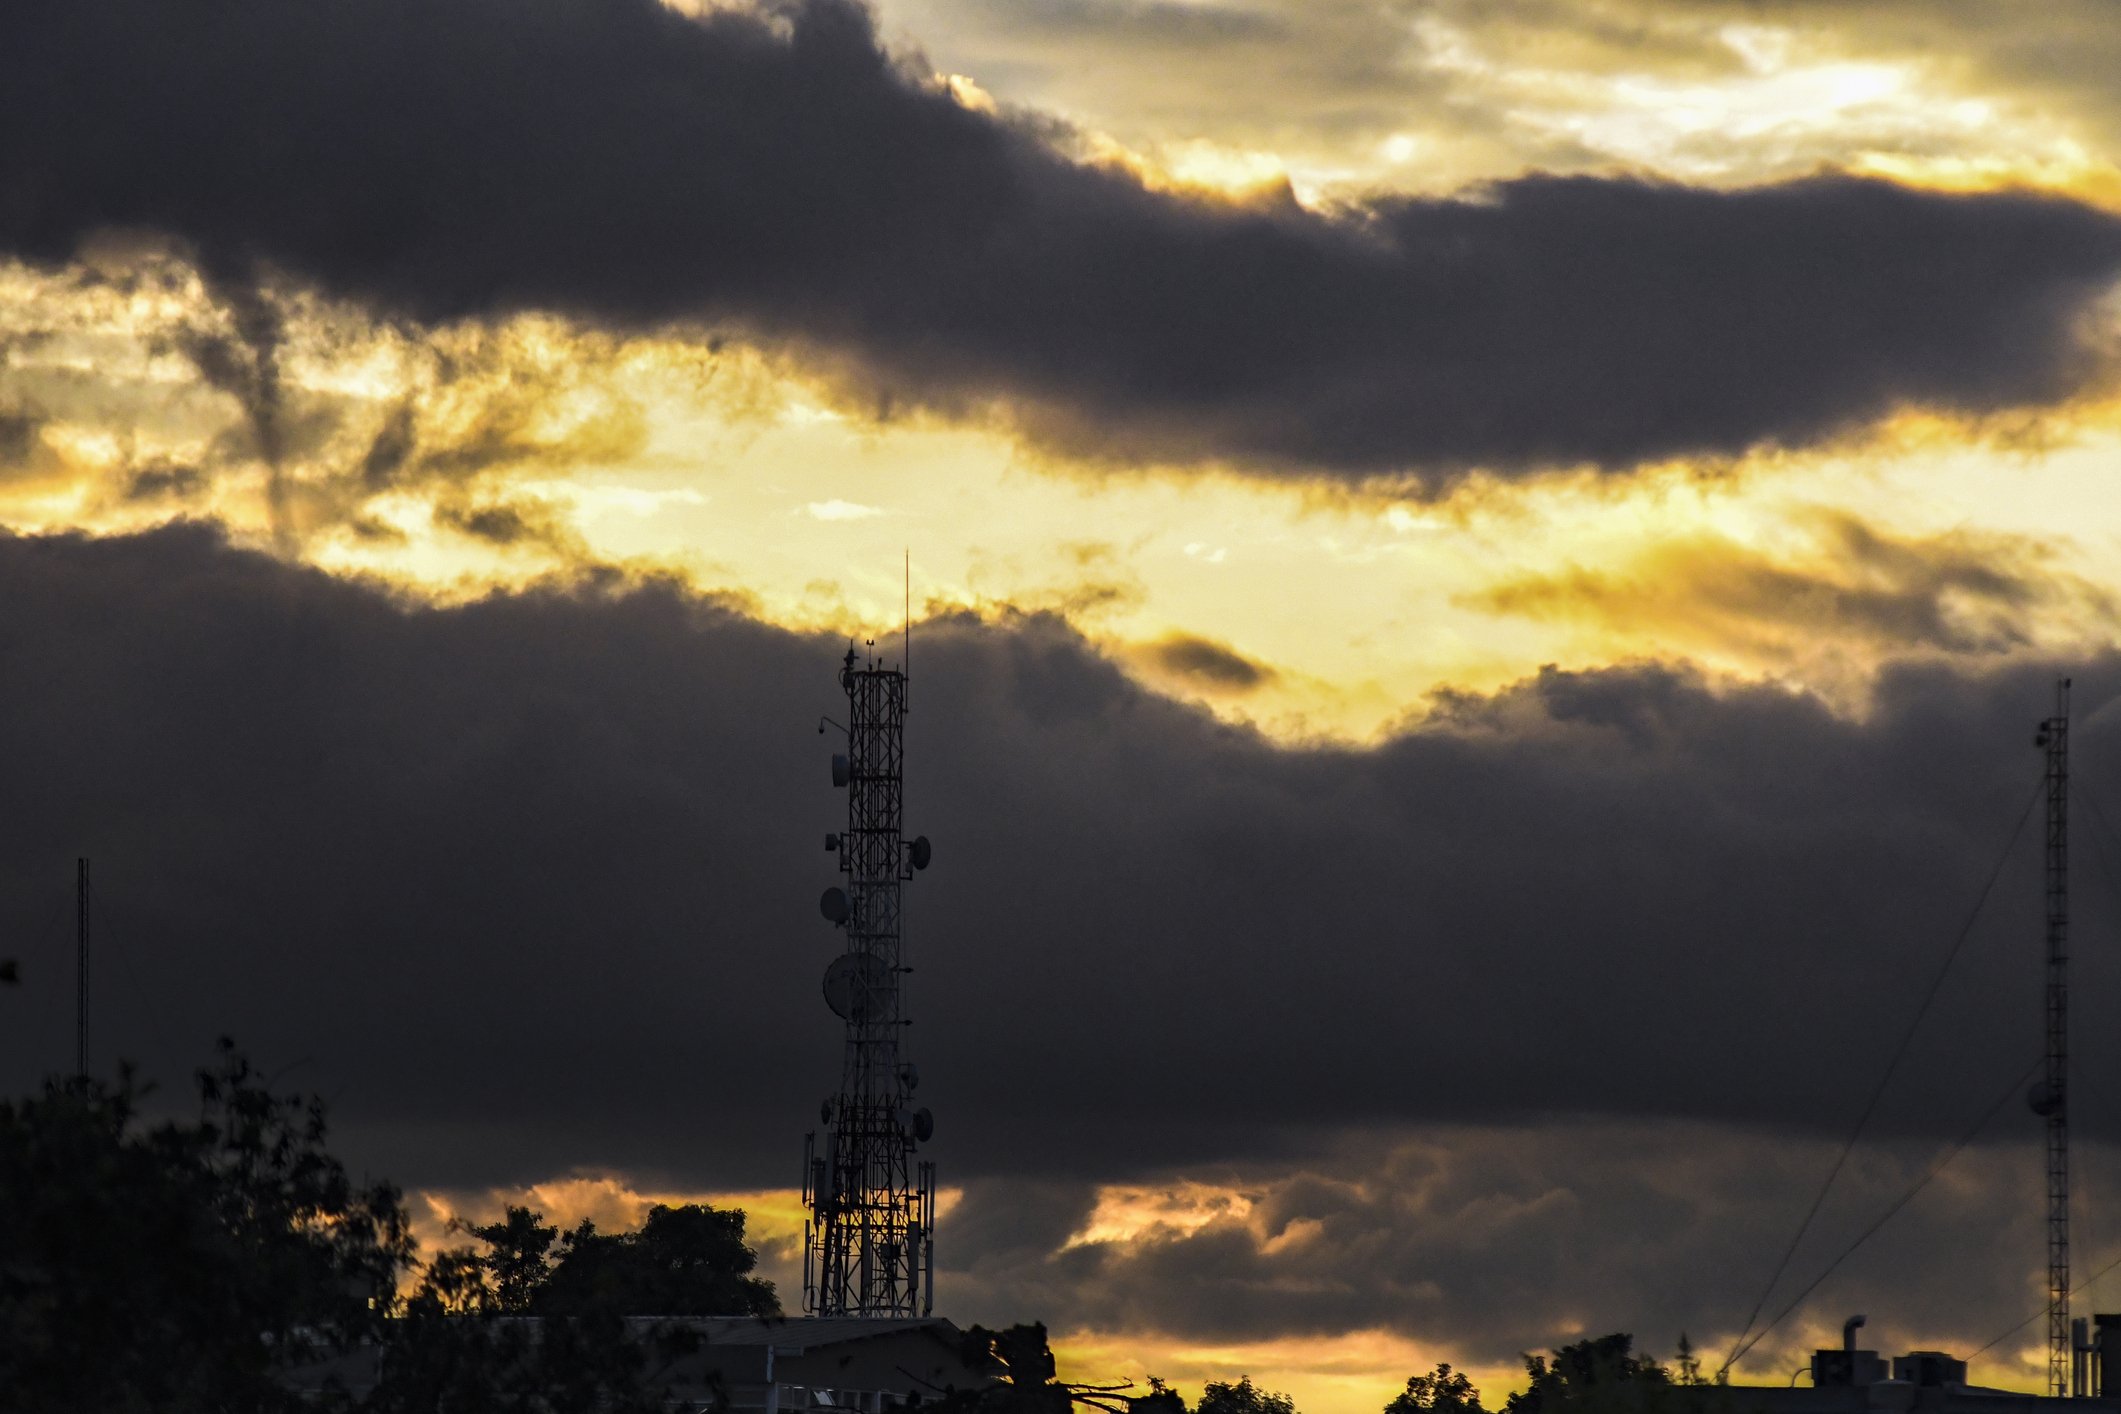 Tigo Colombia to sell 1,100 towers to KKR in Colombia - DCD